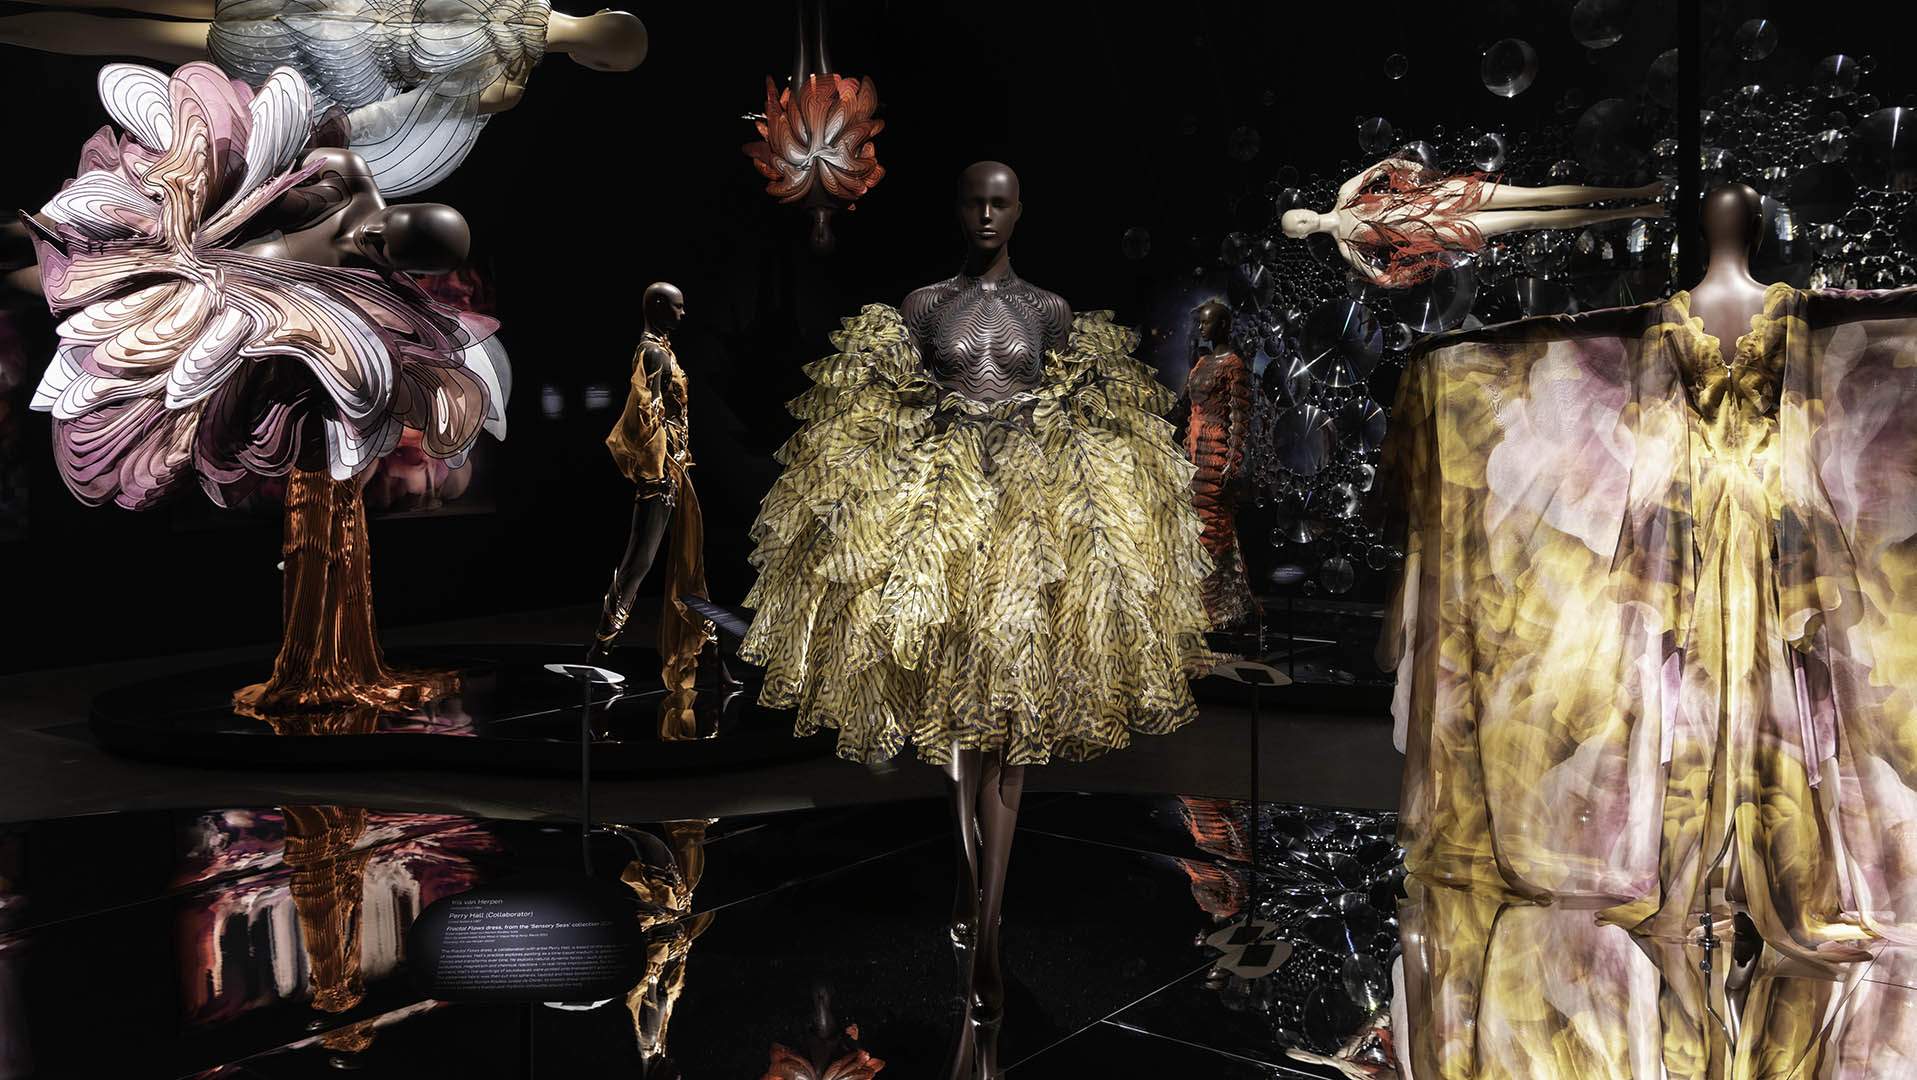 Now Open: Iris van Herpen's Stunning Couture Designs Have Arrived Down Under at GOMA's 'Sculpting the Senses' Exhibition